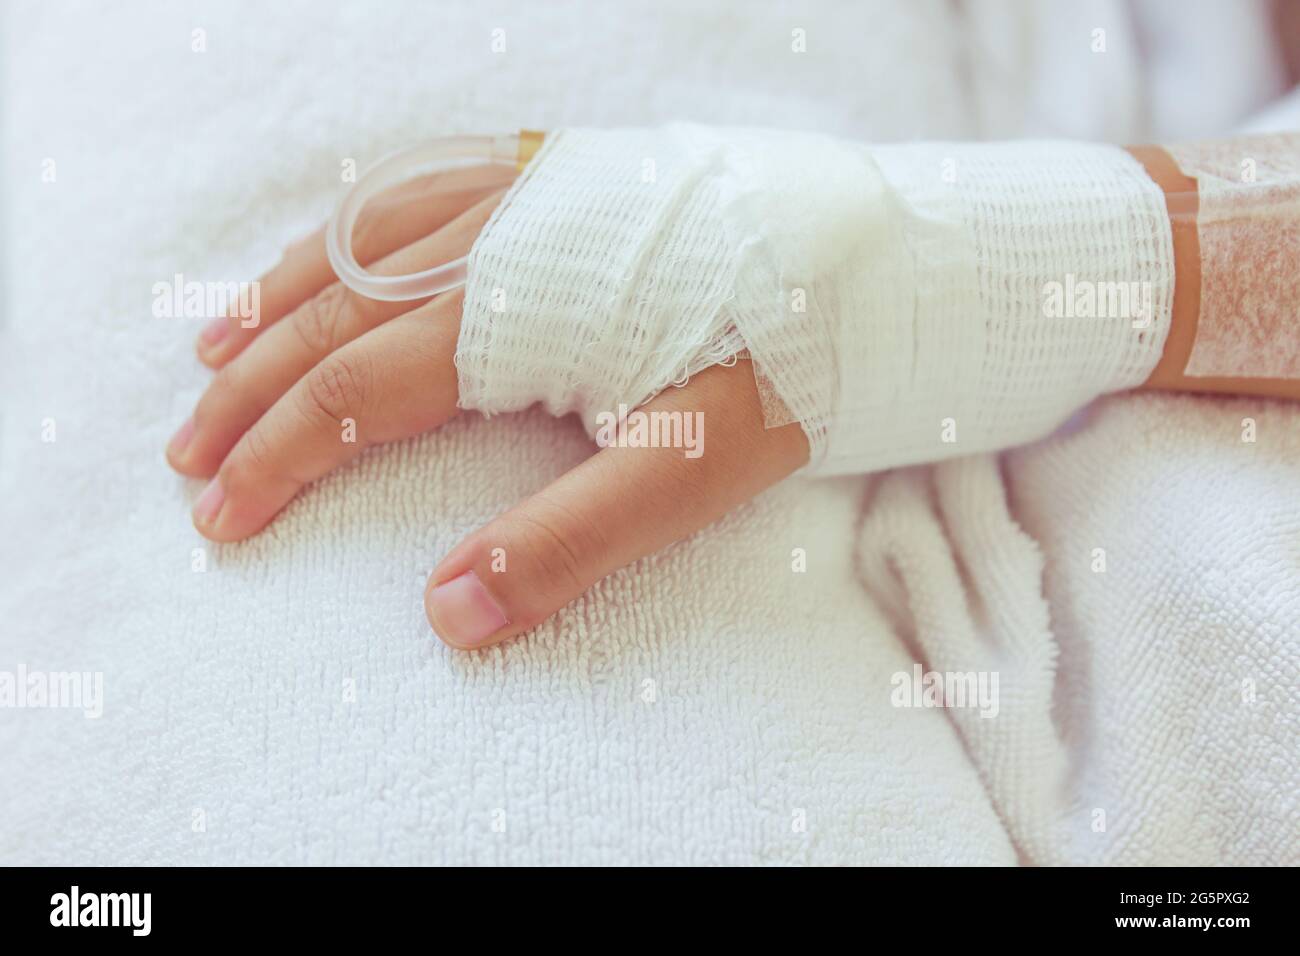 Close up of saline intravenous (iv) drip in a child's patient hand. Health care and people concept. Vintage style. Stock Photo